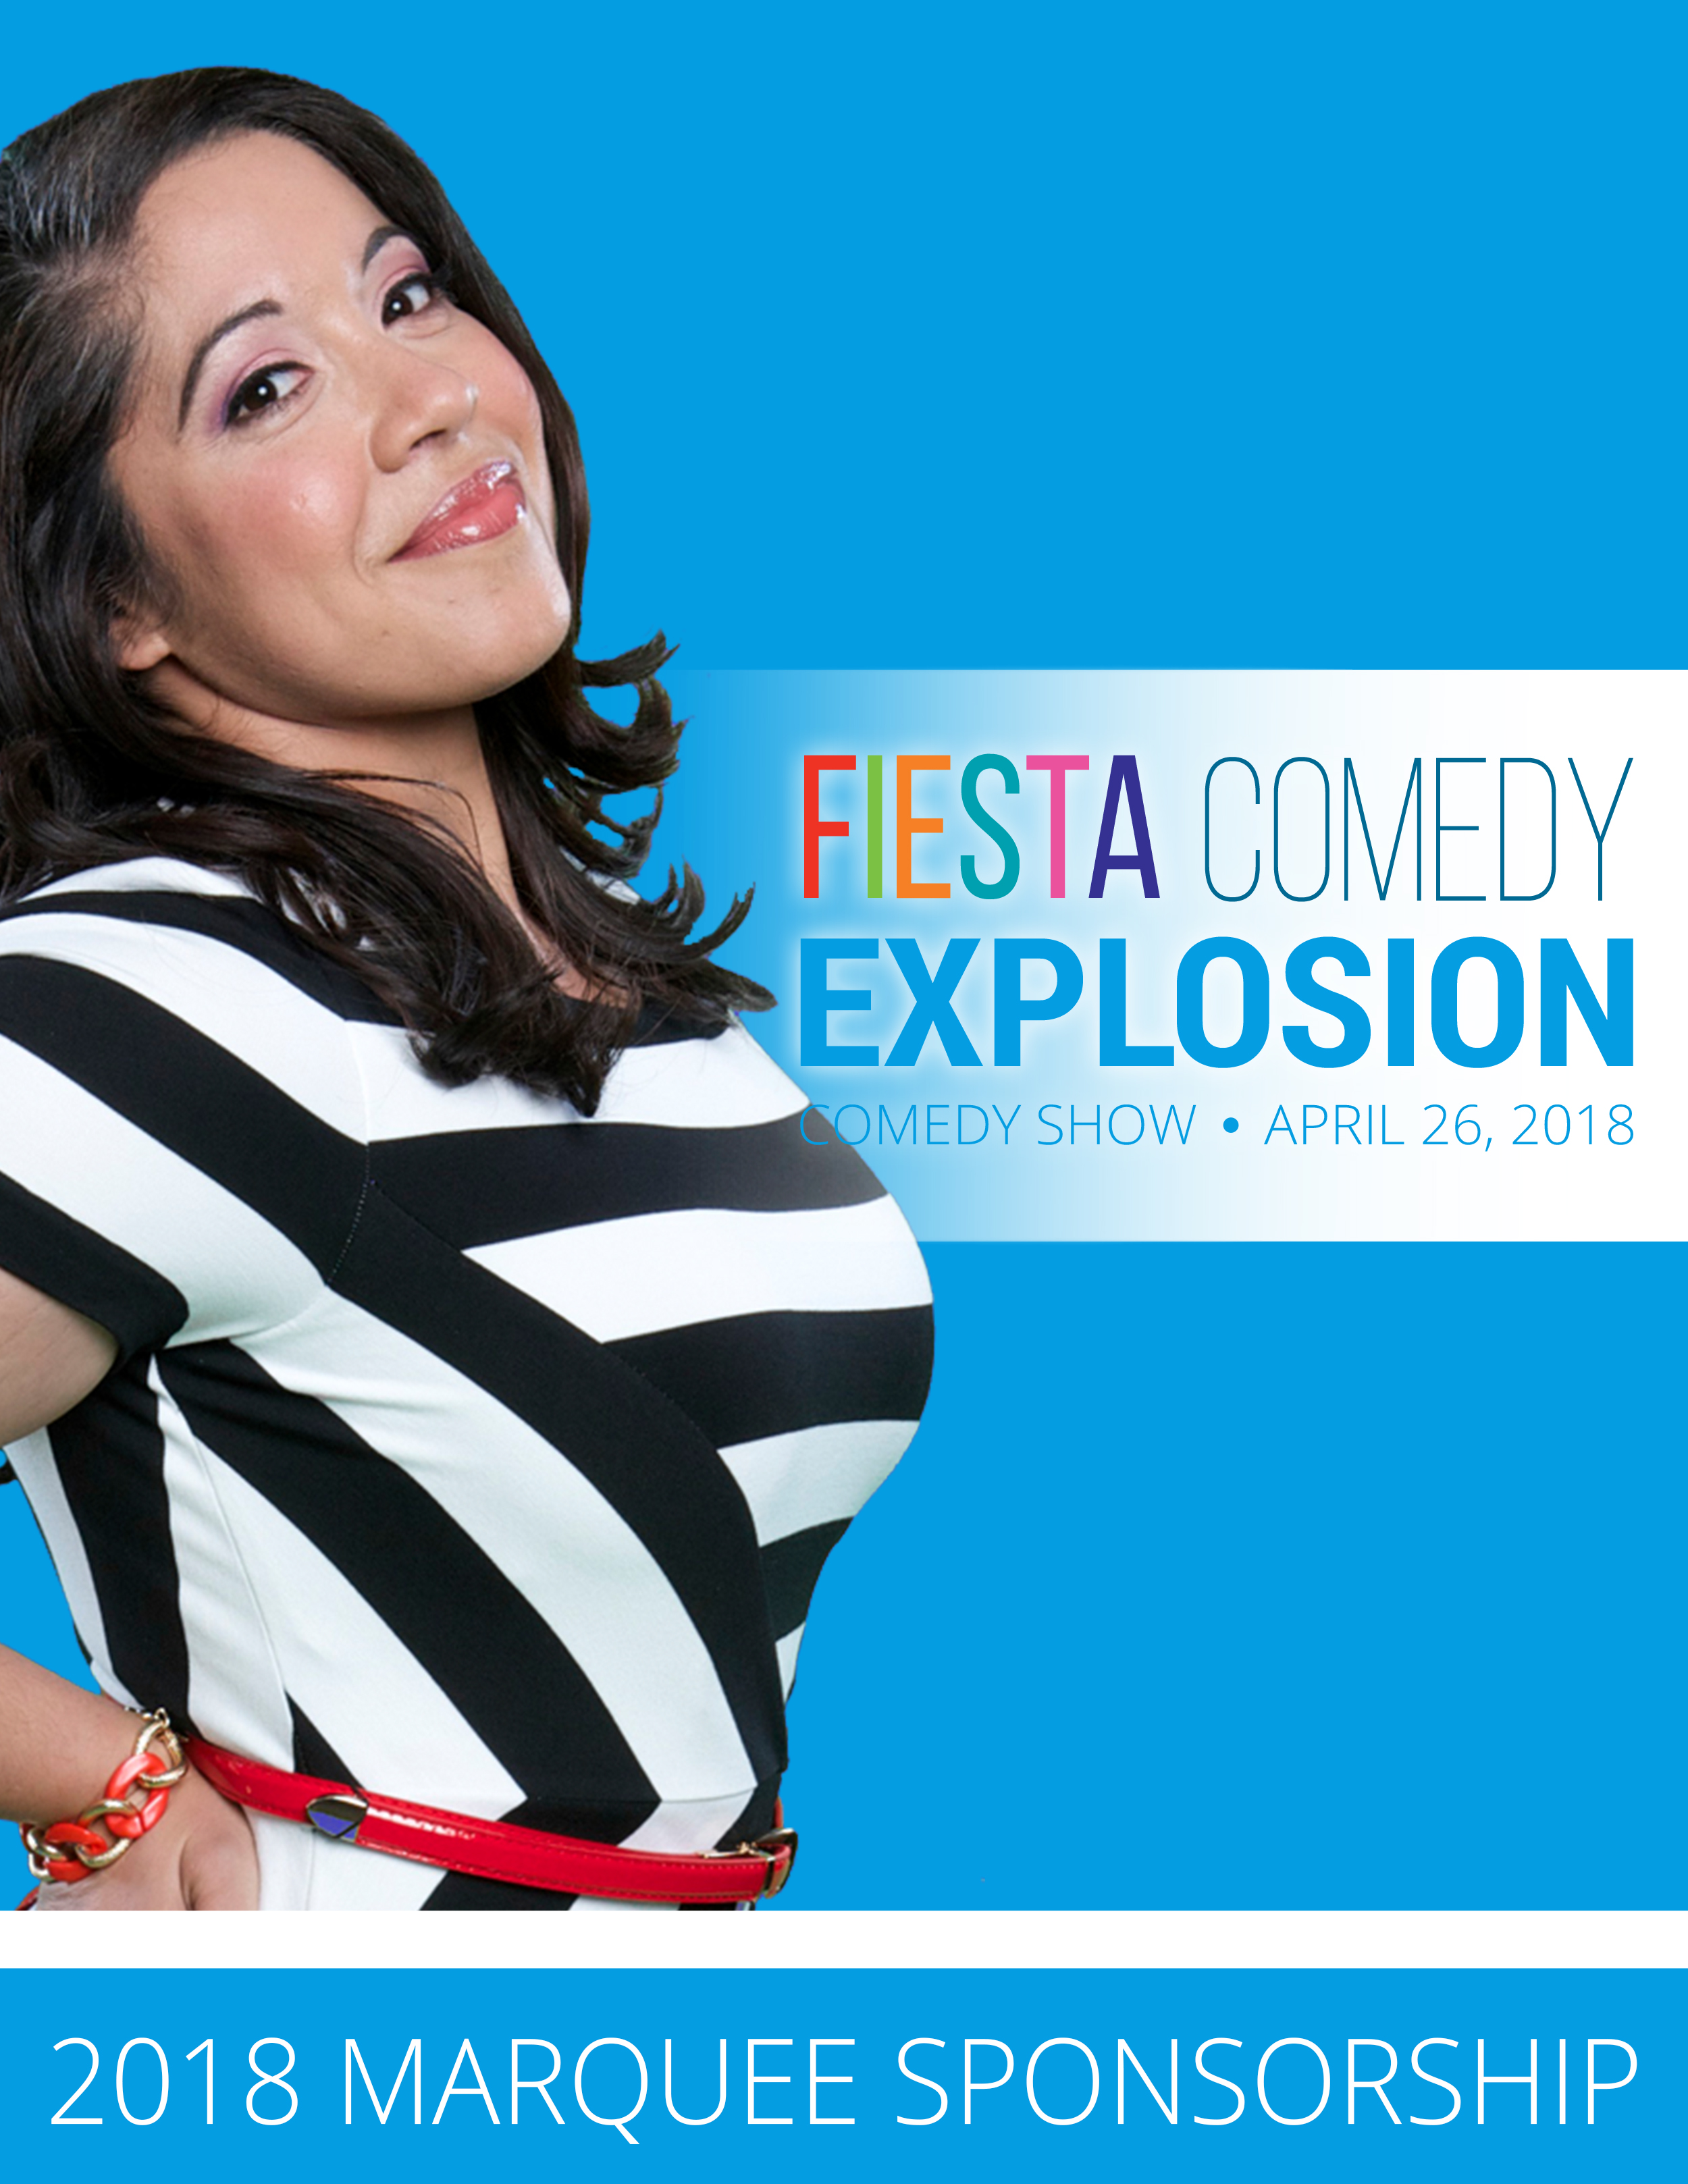 Marquee Sponsorship | Fiesta Comedy Explosion 2018 Sponsorship Package | Fiesta San Antonio | Official Priest Holmes Foundation Website | Priest Holmes Son | Priest Holmes Girlfriend | Priest Holmes Wife | Priest Holmes Engaged | Priest Holmes Family | Priest Holmes is Engaged